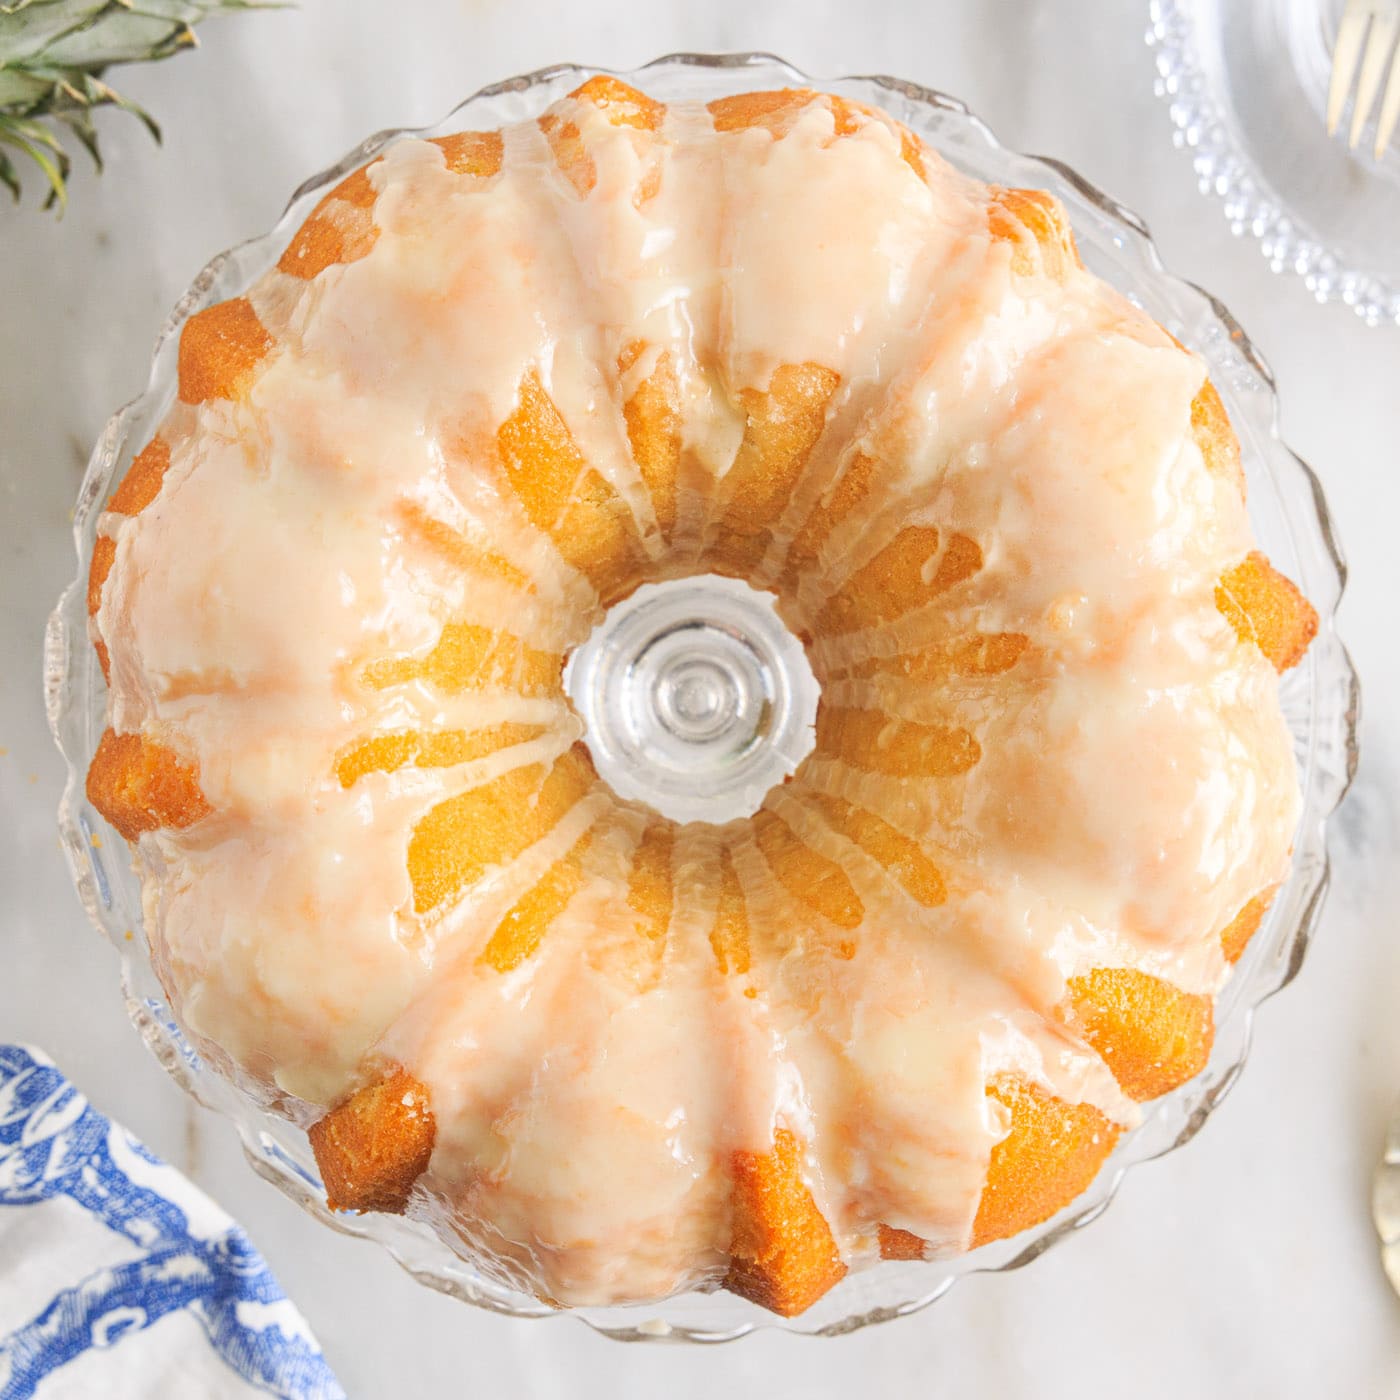 Holly's Kitchen: Cream Cheese Pound Cake is a great start for creative layer  cakes